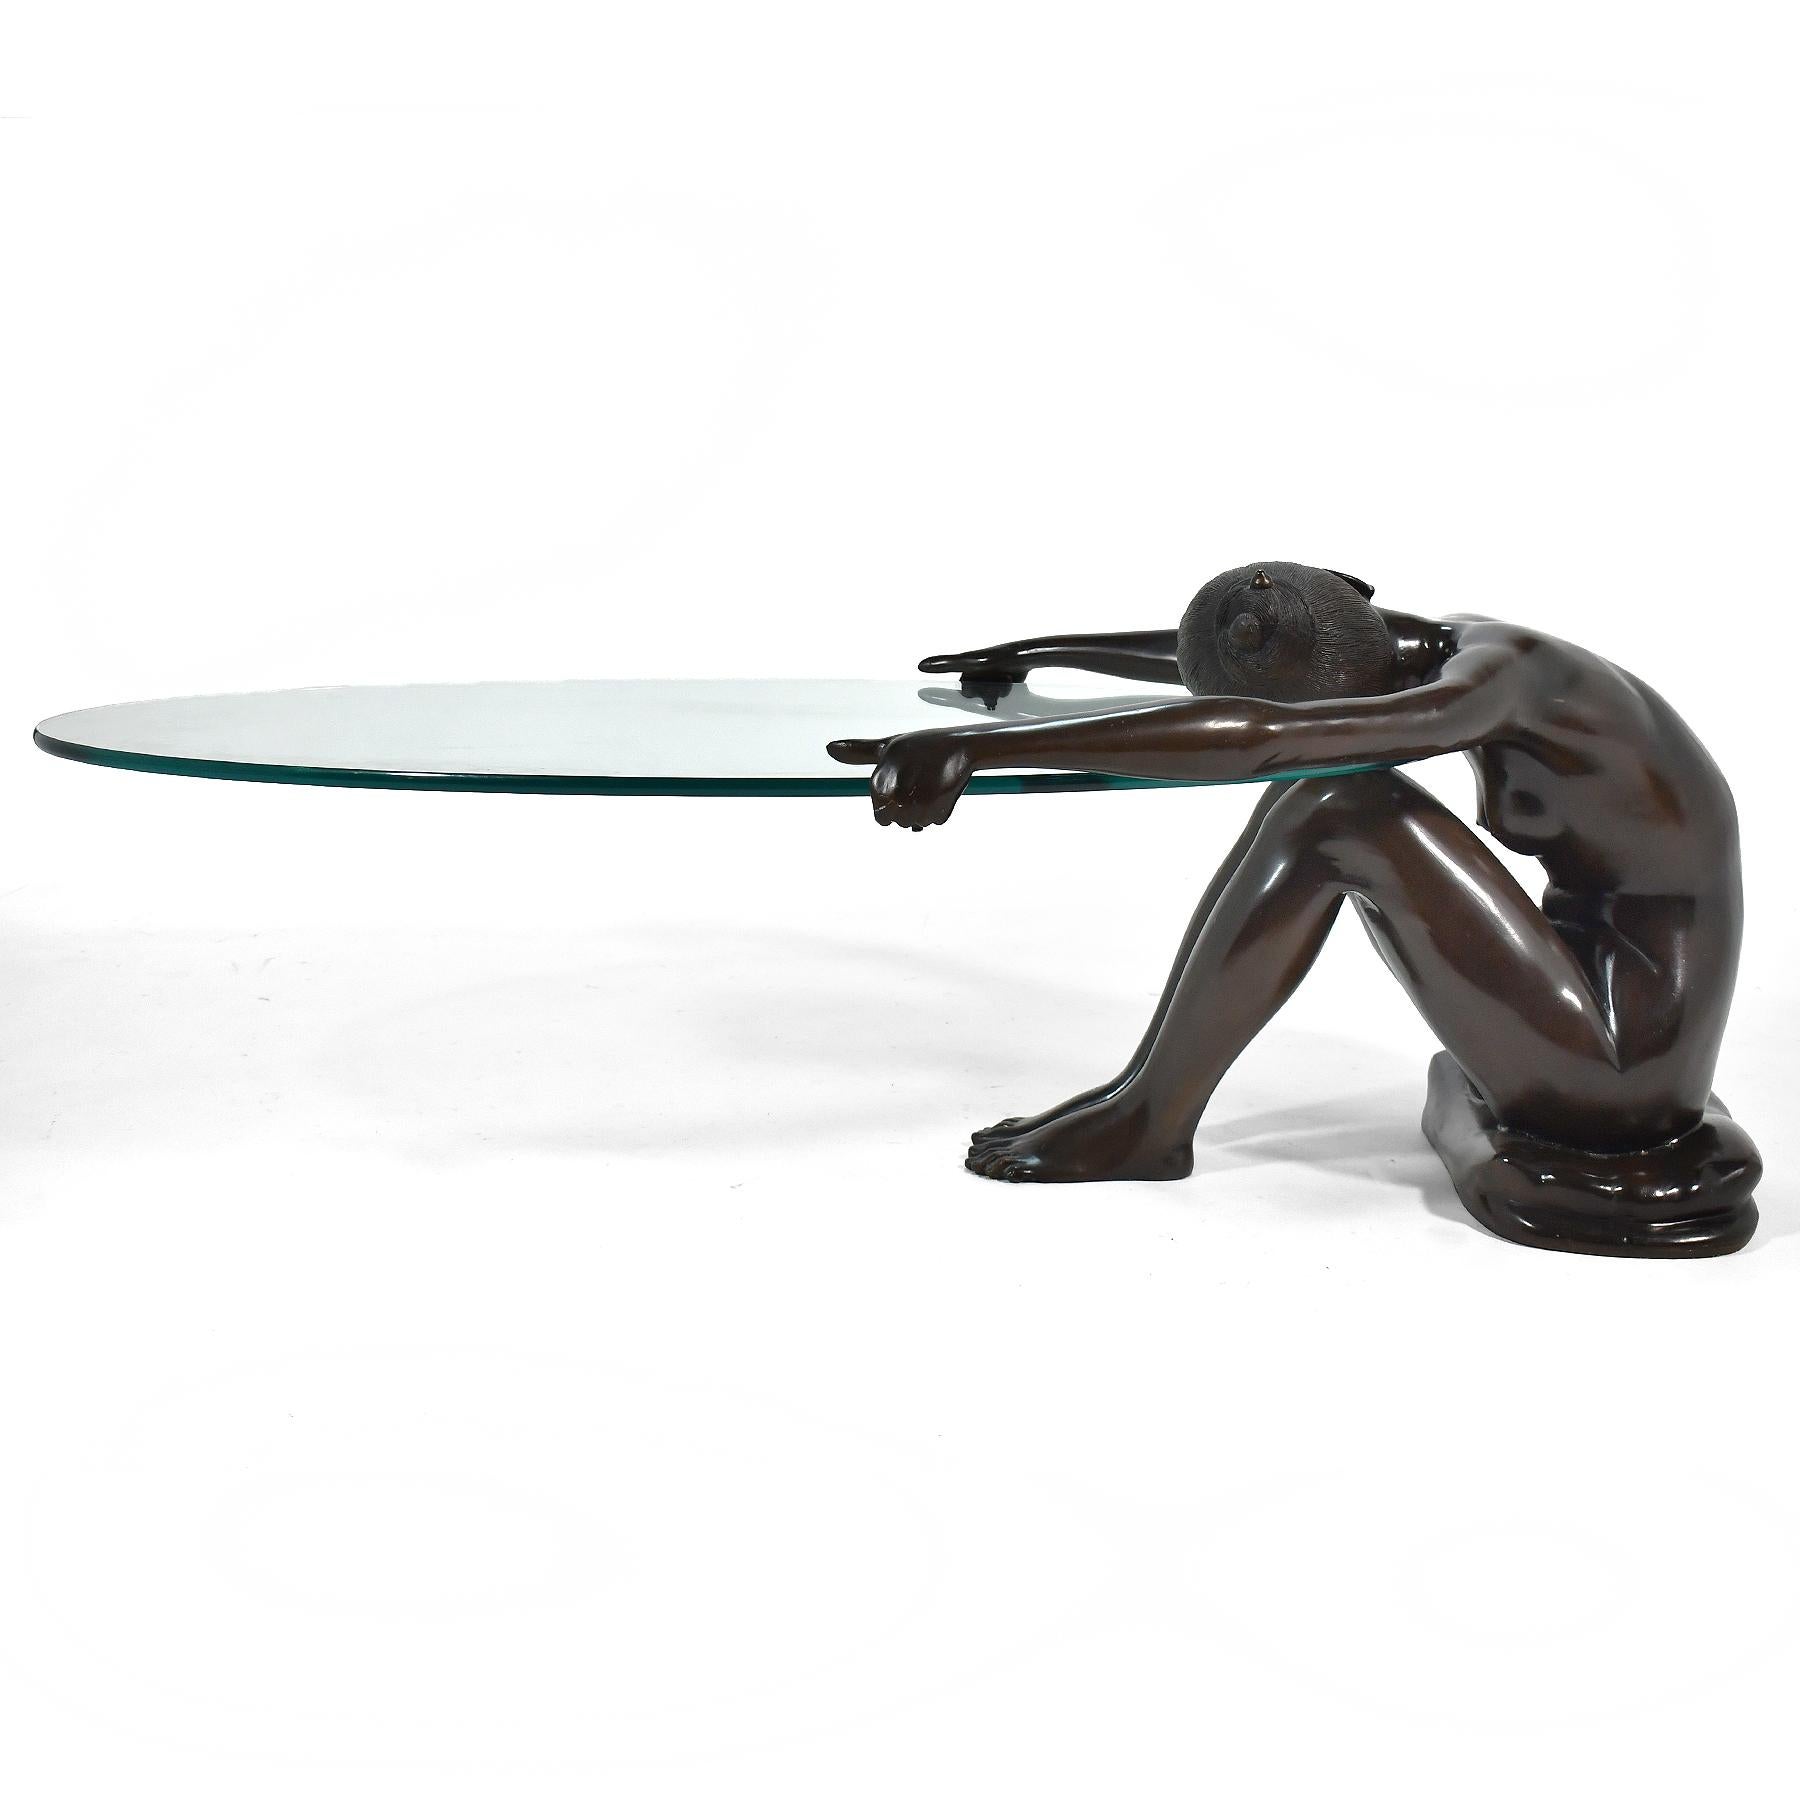 naked lady coffee table